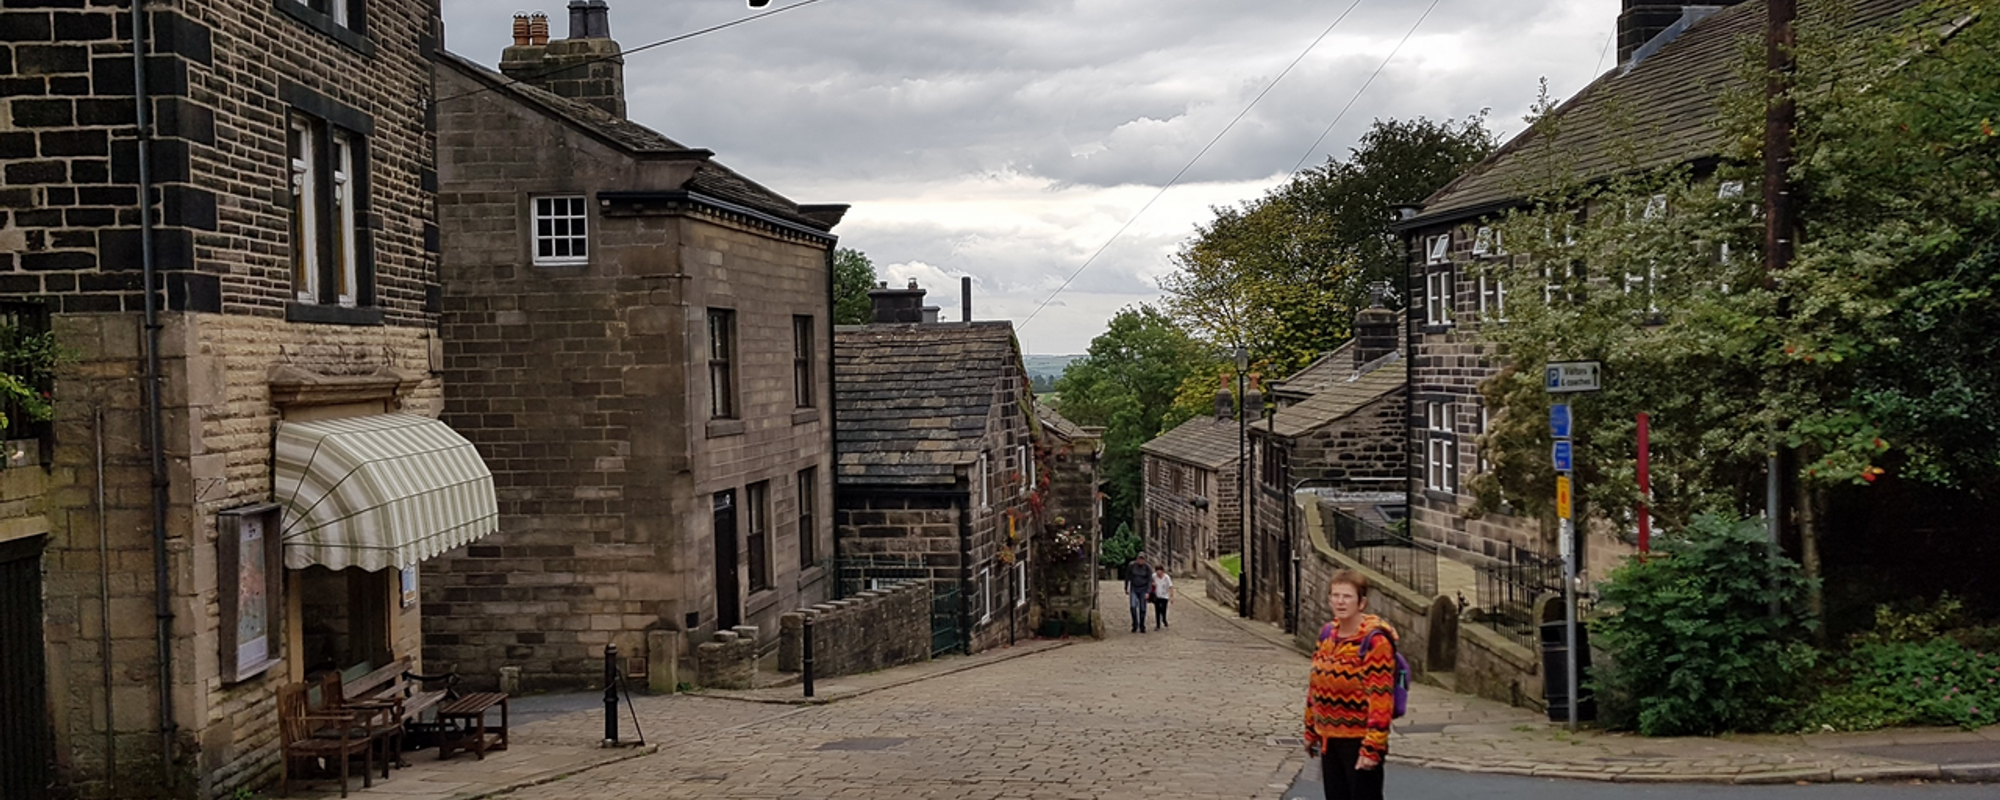 Heptonstall - Cobblestones, Churches and Sylvia Plath's Grave